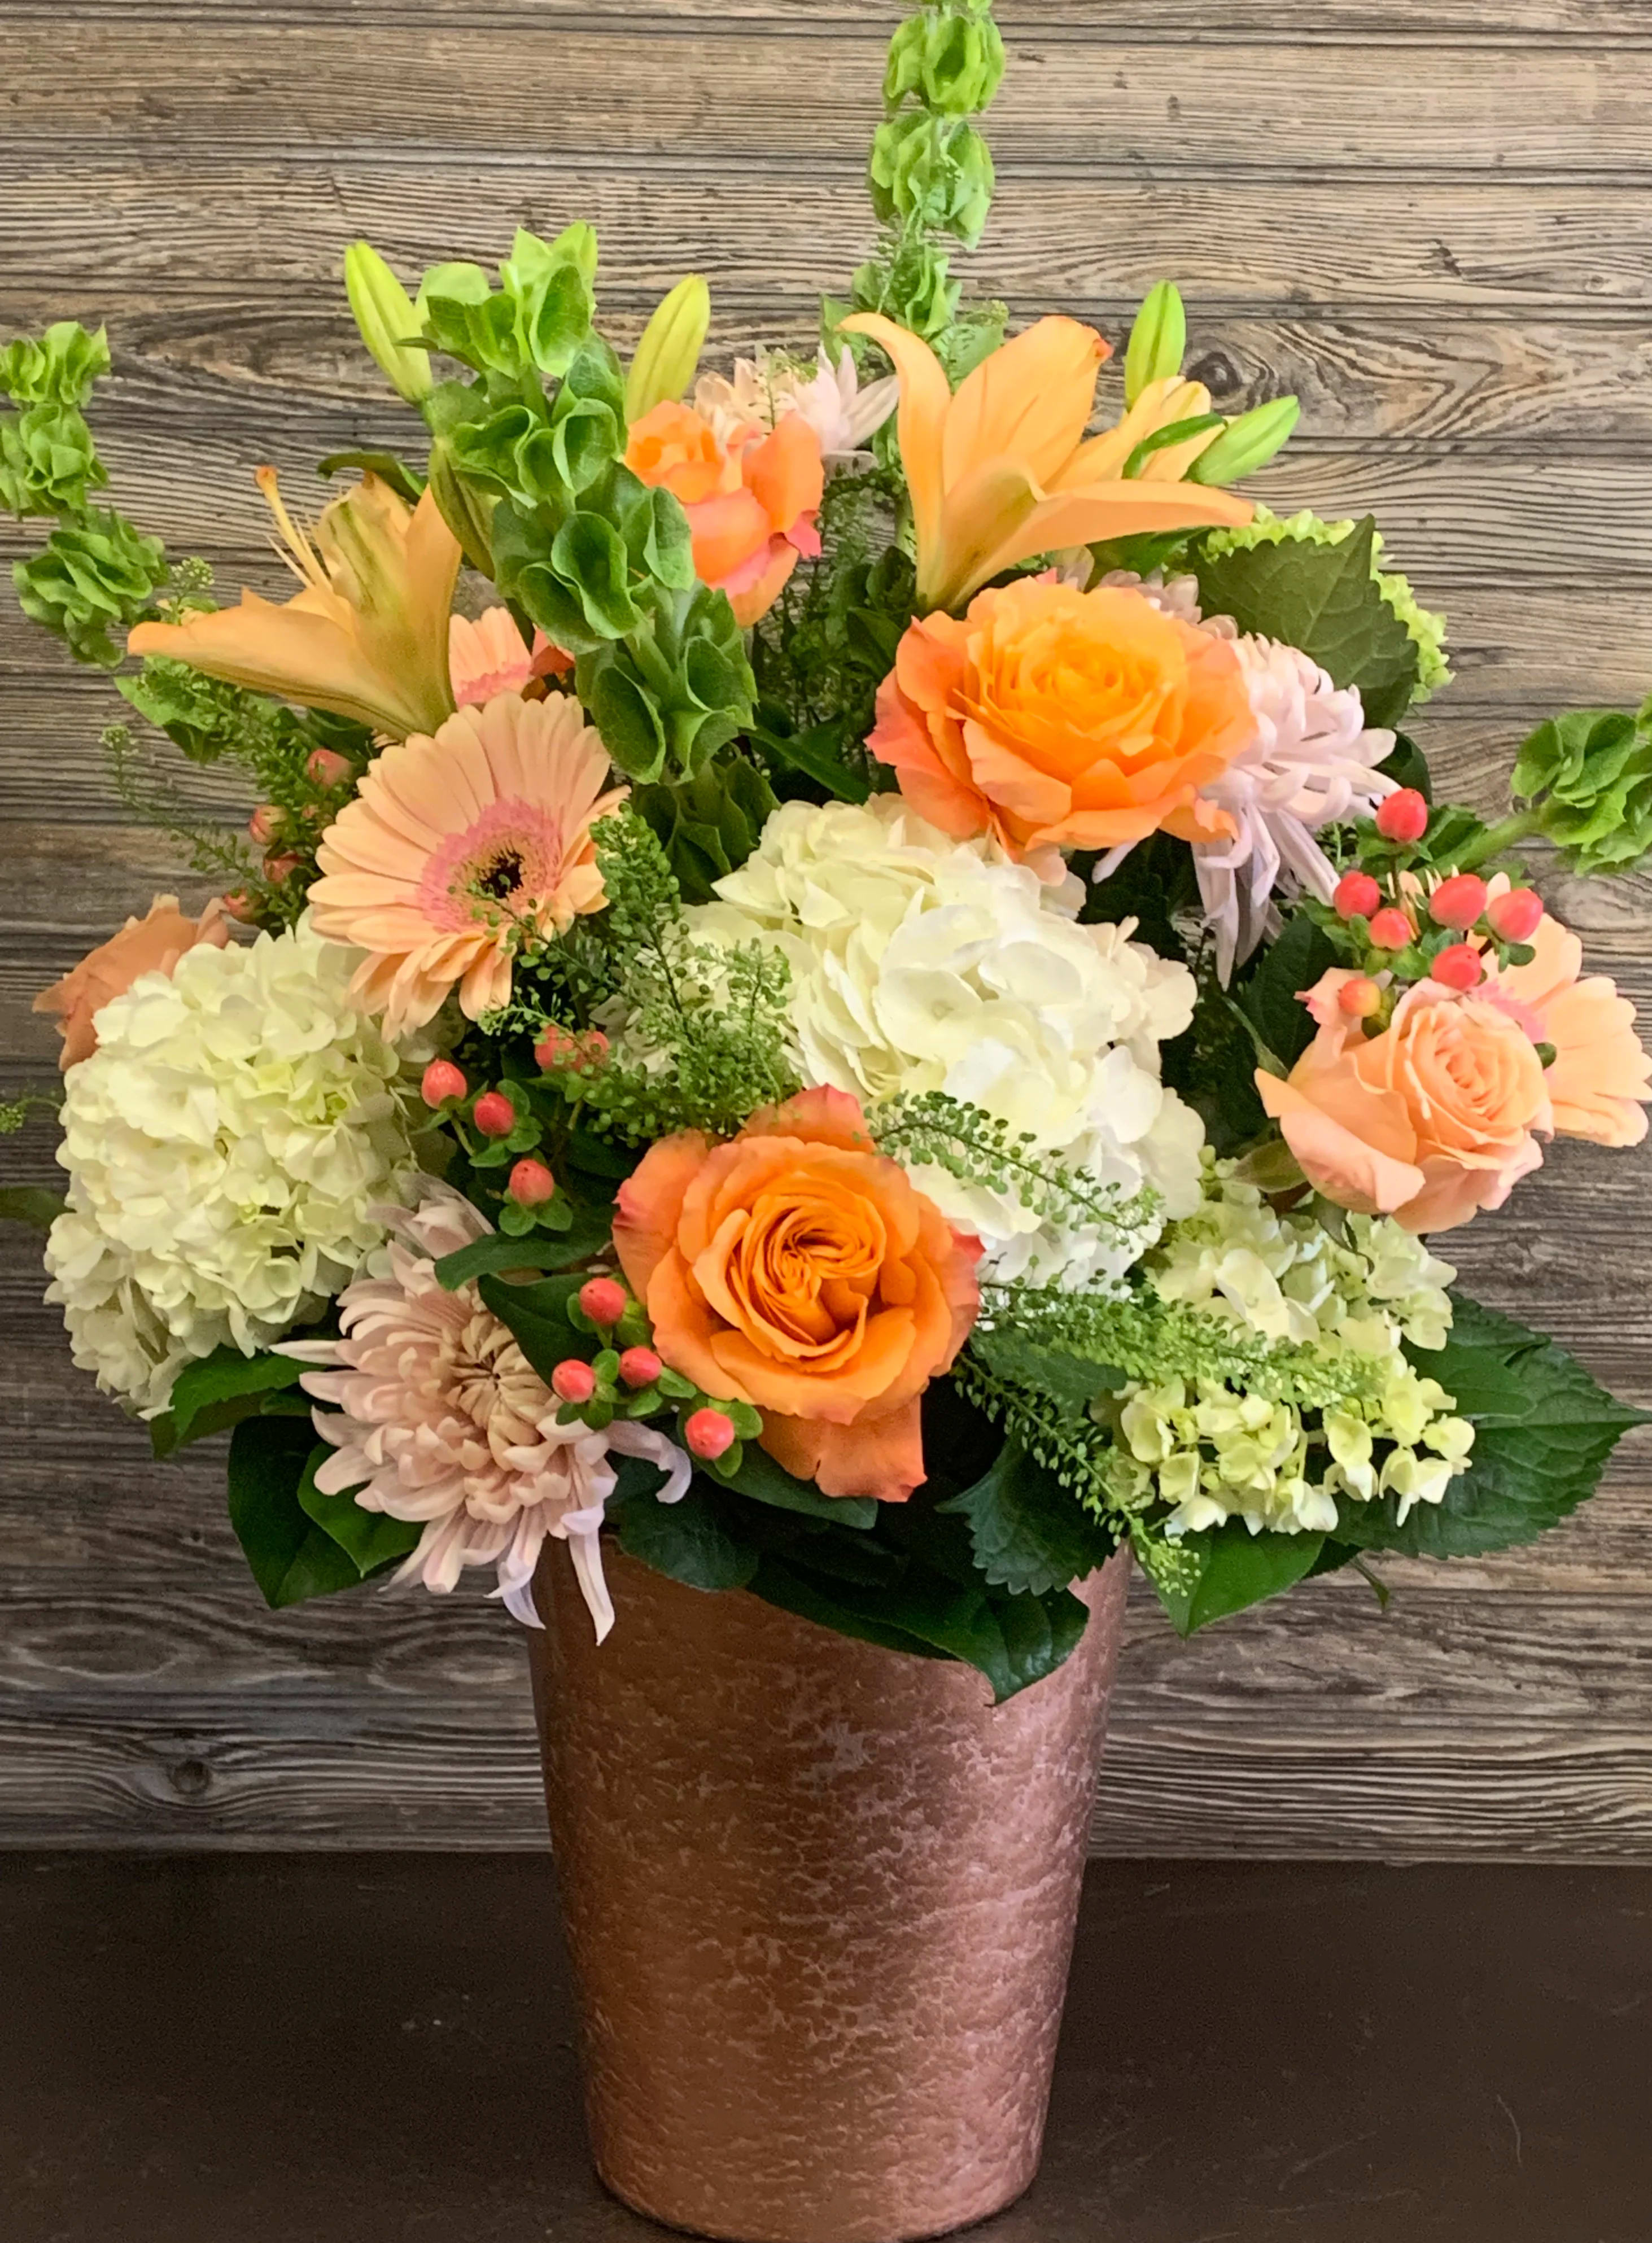 Peachy Keen  - Shades of Pink, Peaches and Pistachio Greens arranged in a garden-style assortment of hydrangeas, bells of Ireland, roses, cremons, lilies, greenery, fillers, &amp; berries. Arranged in a cooper mercury vase that is 9hx7w.  The arrangement designed is about 25hx20w.   